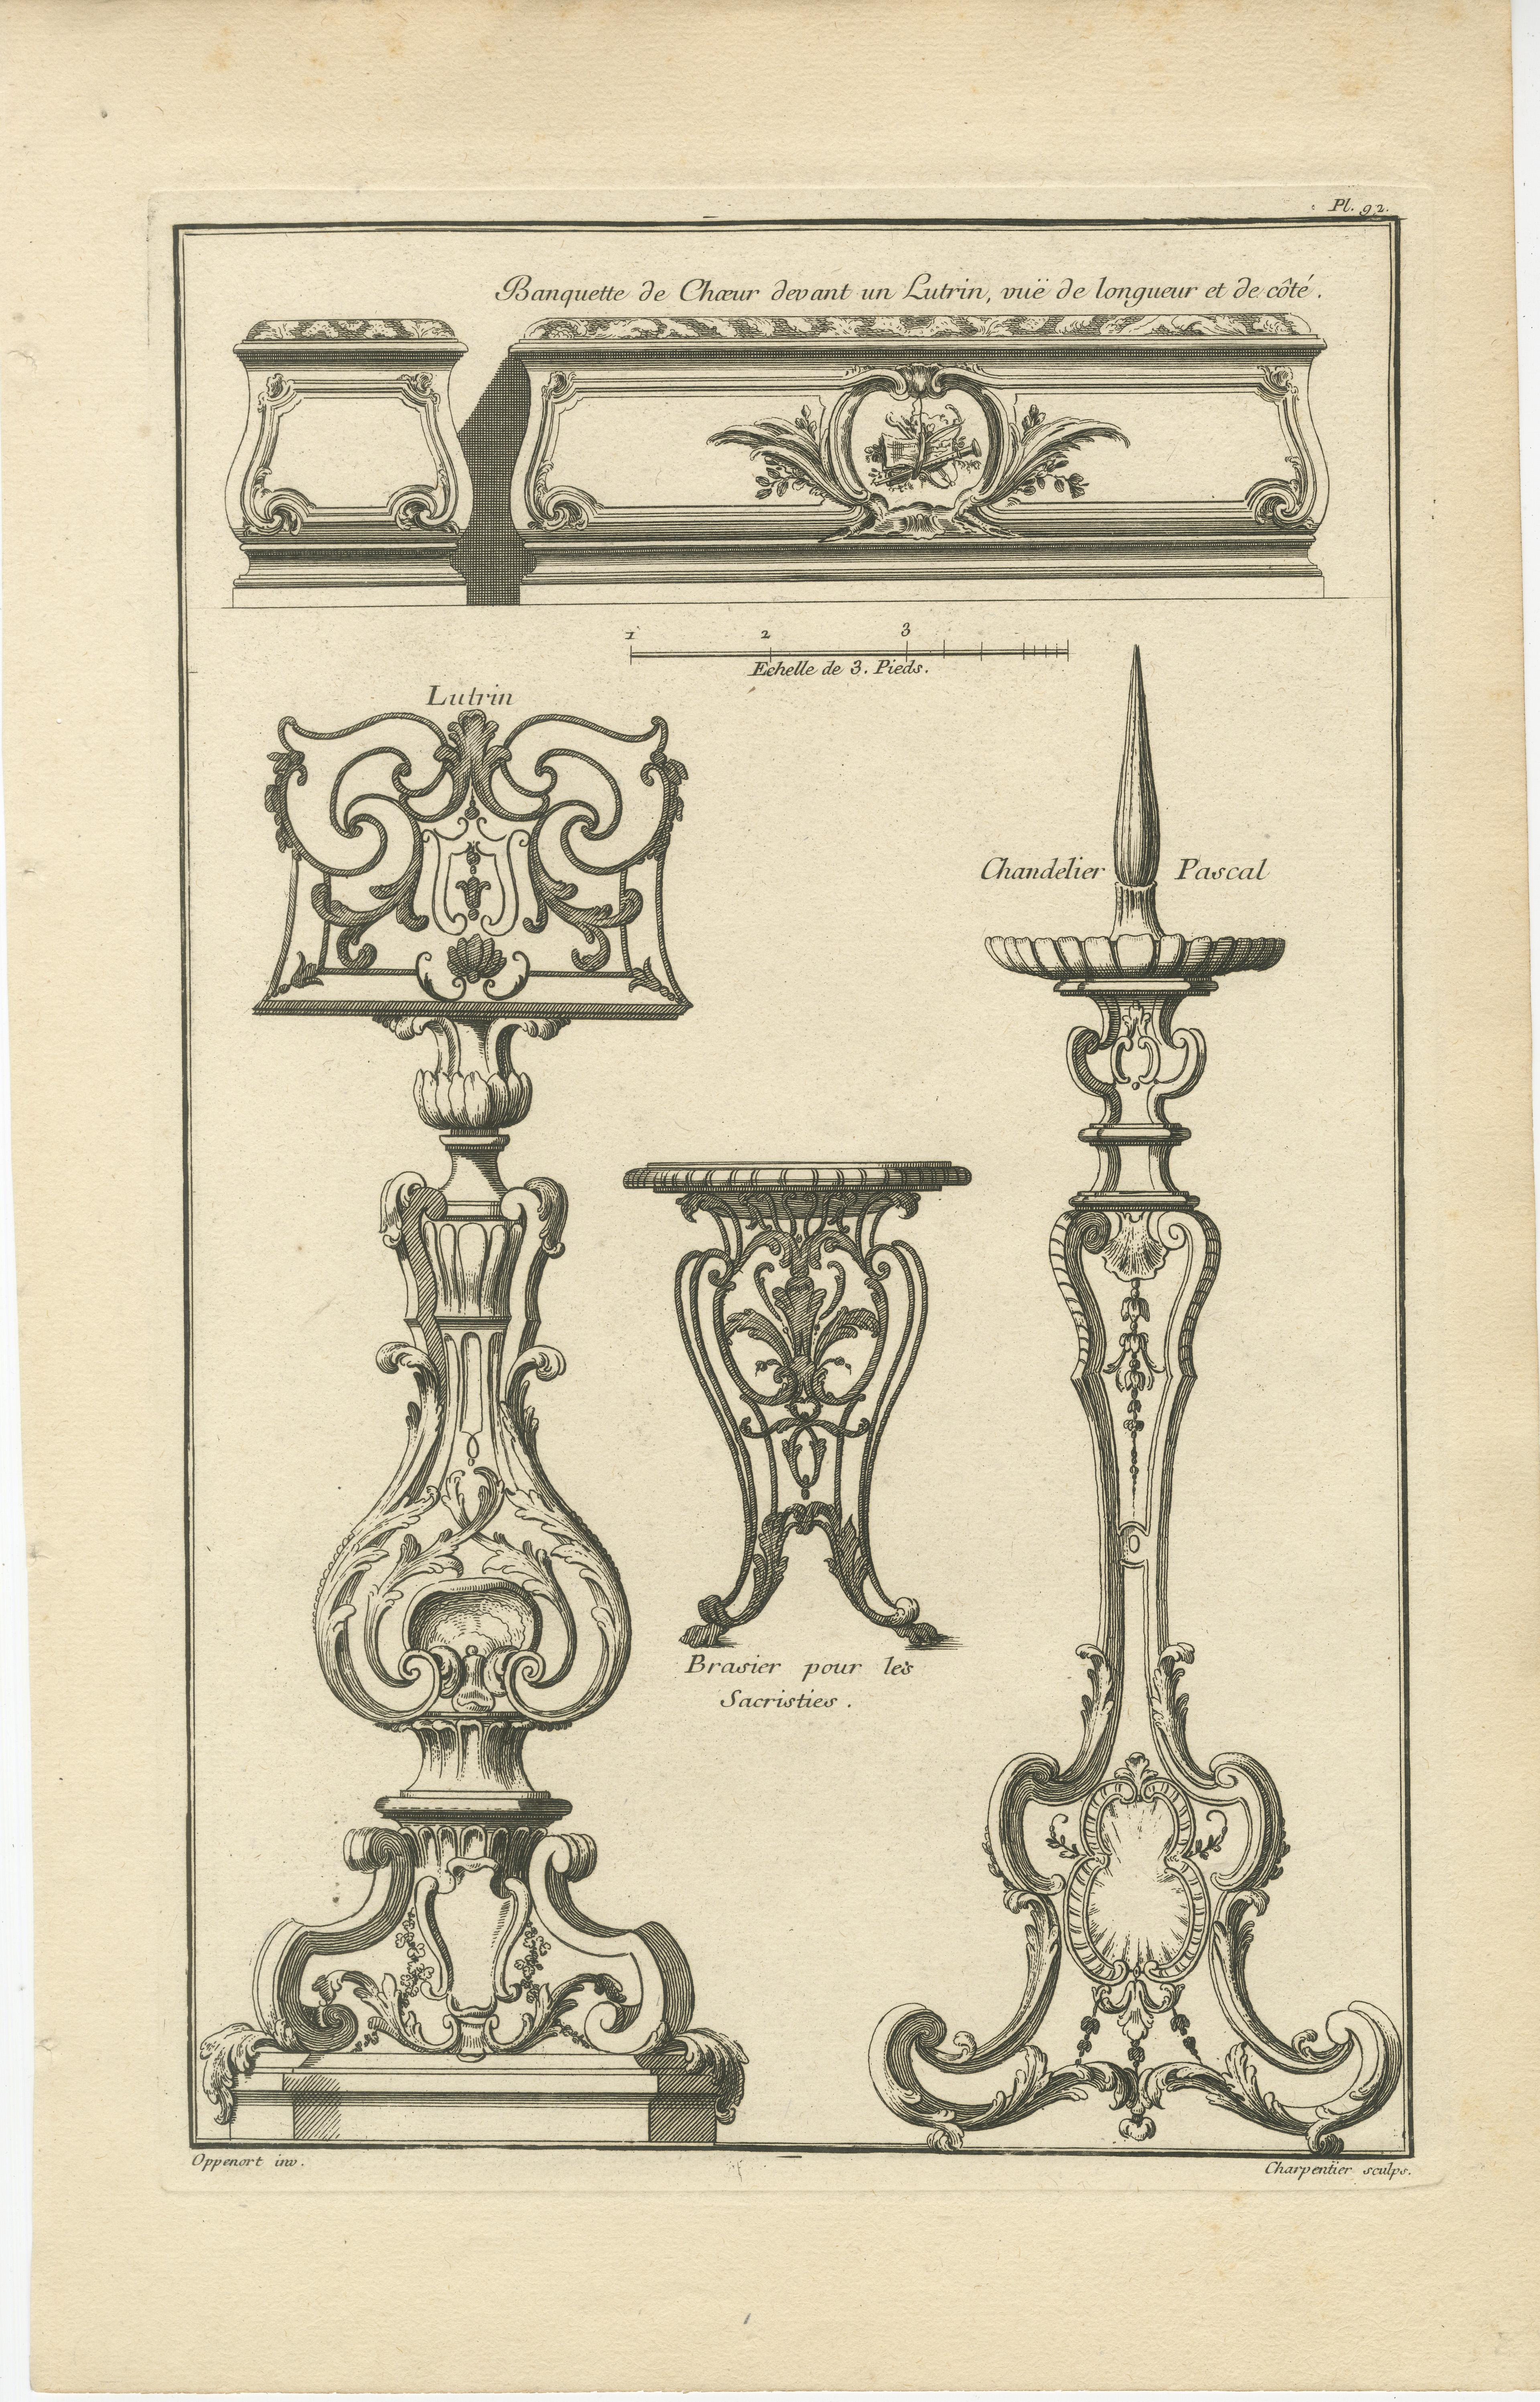 The engravings are a stunning representation of Baroque ironwork designs, a testament to the intricate artistry of the 18th century. Created in 1767, the works of Charpentier and Huquier, as well as Soubeyaran and Oppenort, are depicted in these